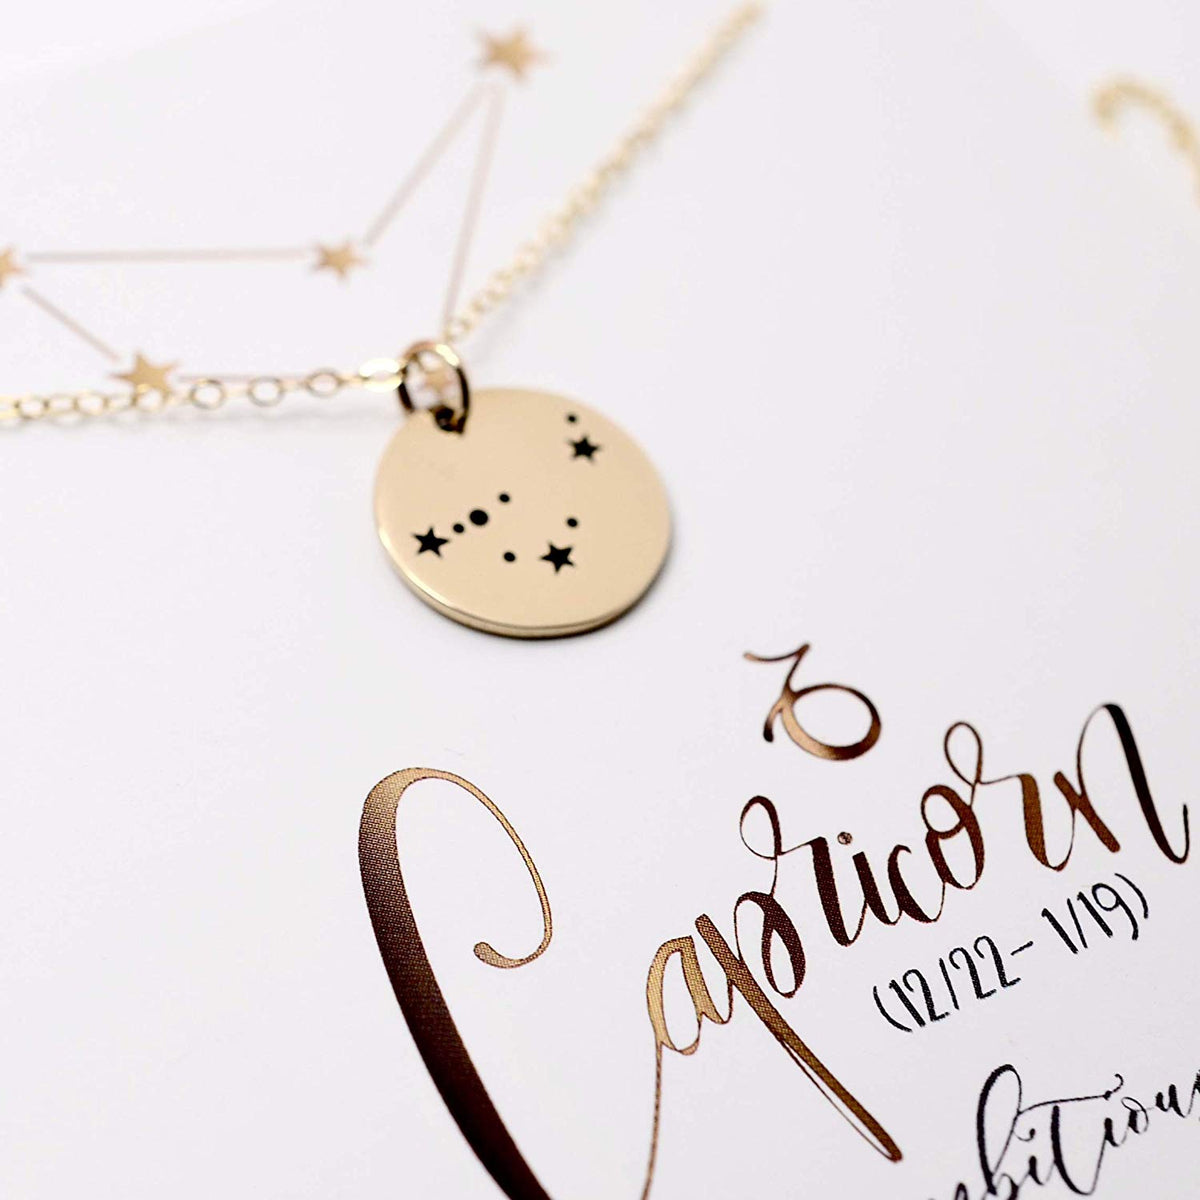 Capricorn Zodiac Sign 14K Gold Filled Constellation Necklace - Love It Personalized